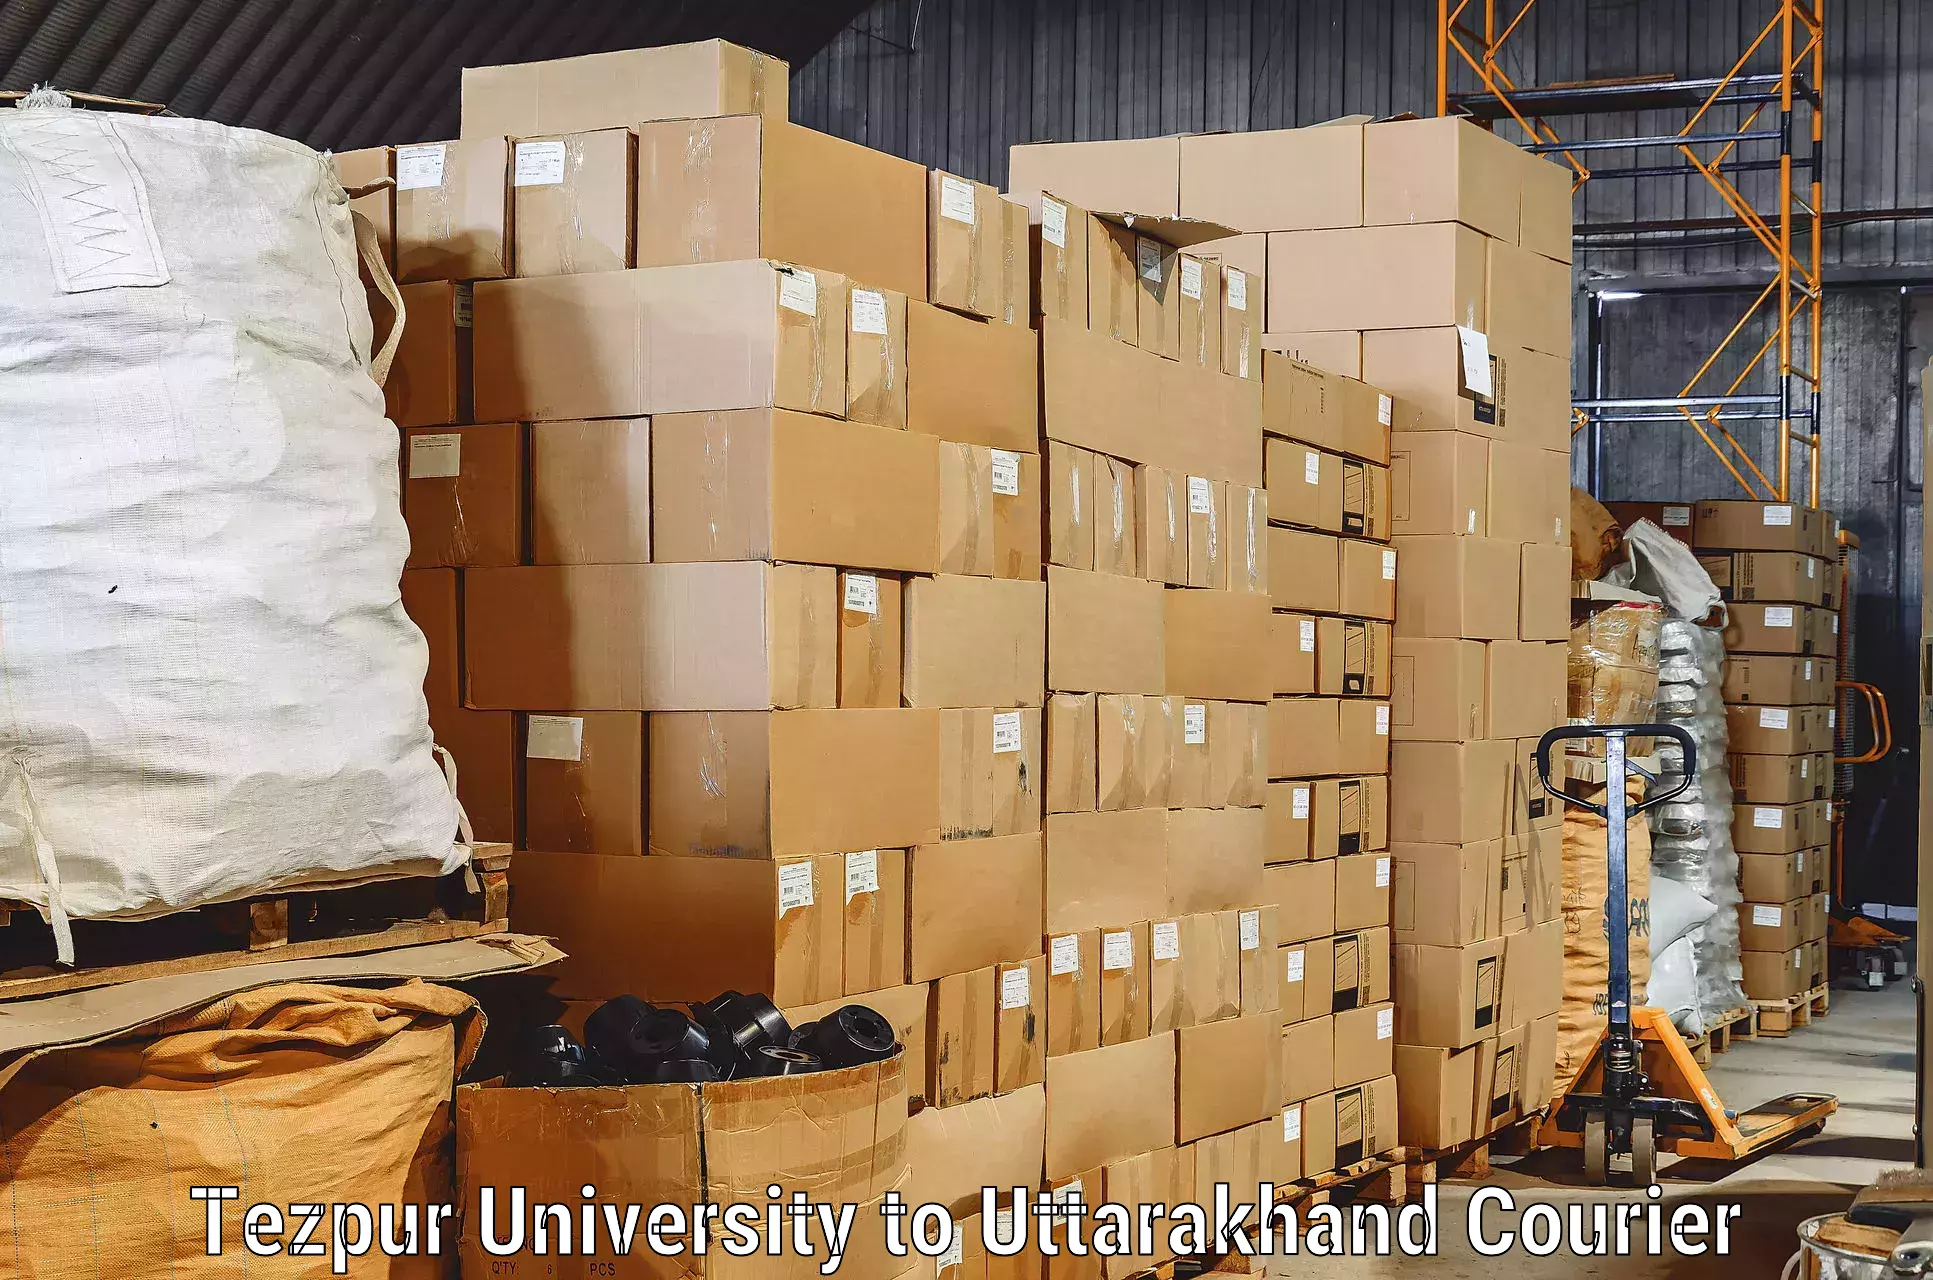 Moving and handling services Tezpur University to Joshimath